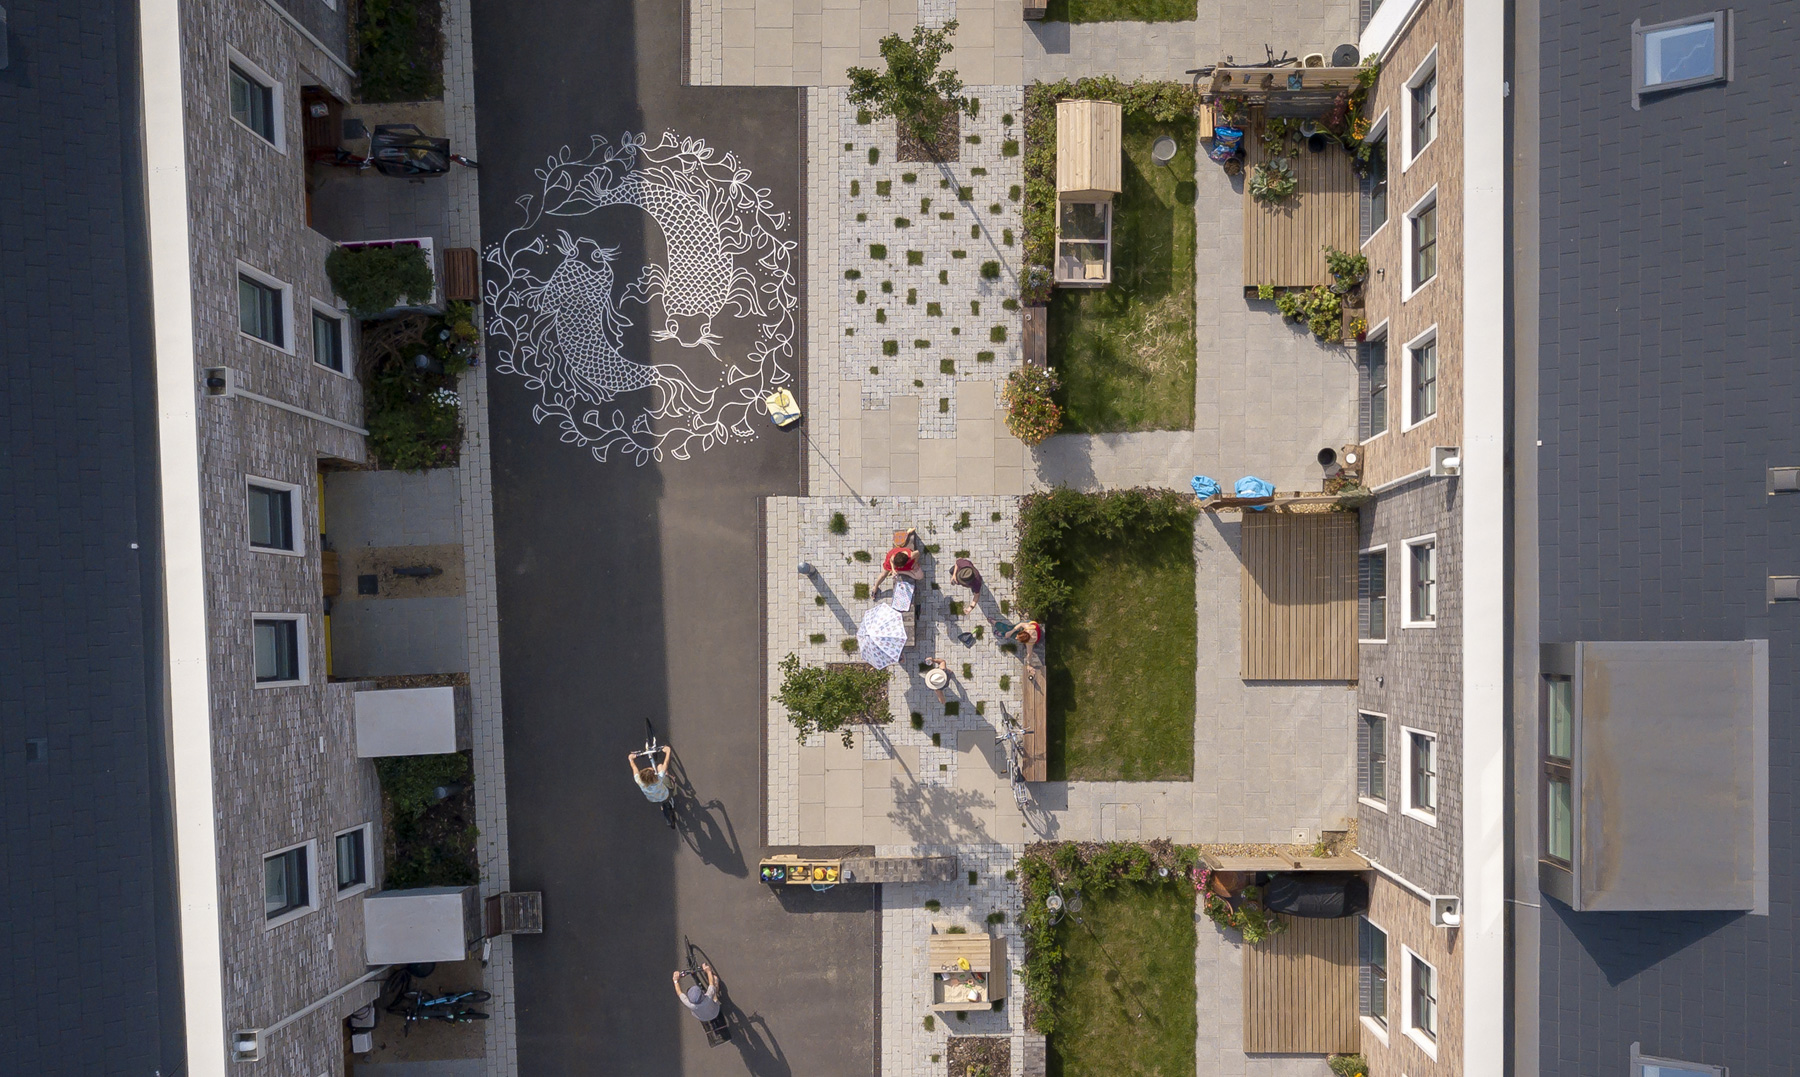 Aerial of Marmalade lane showing cyclists and children playing